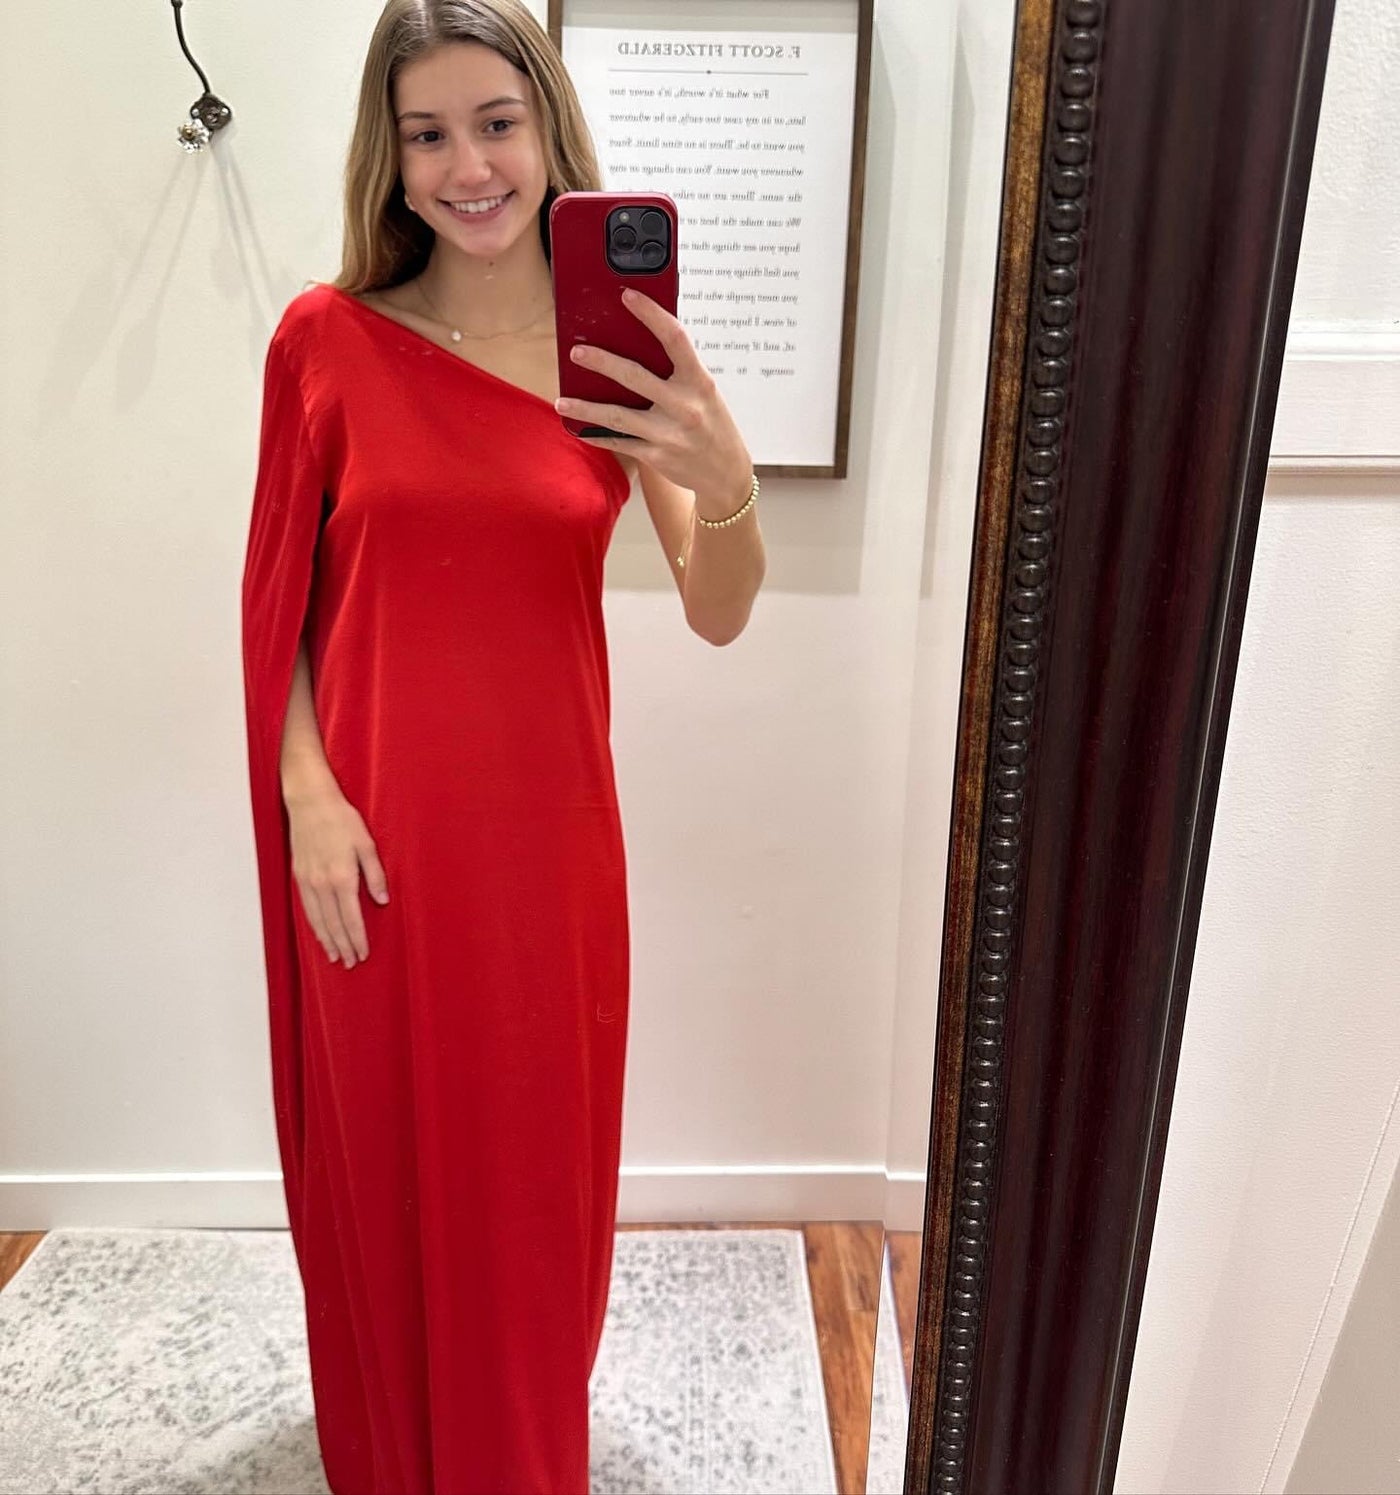 Lady in Red Maxi Dress